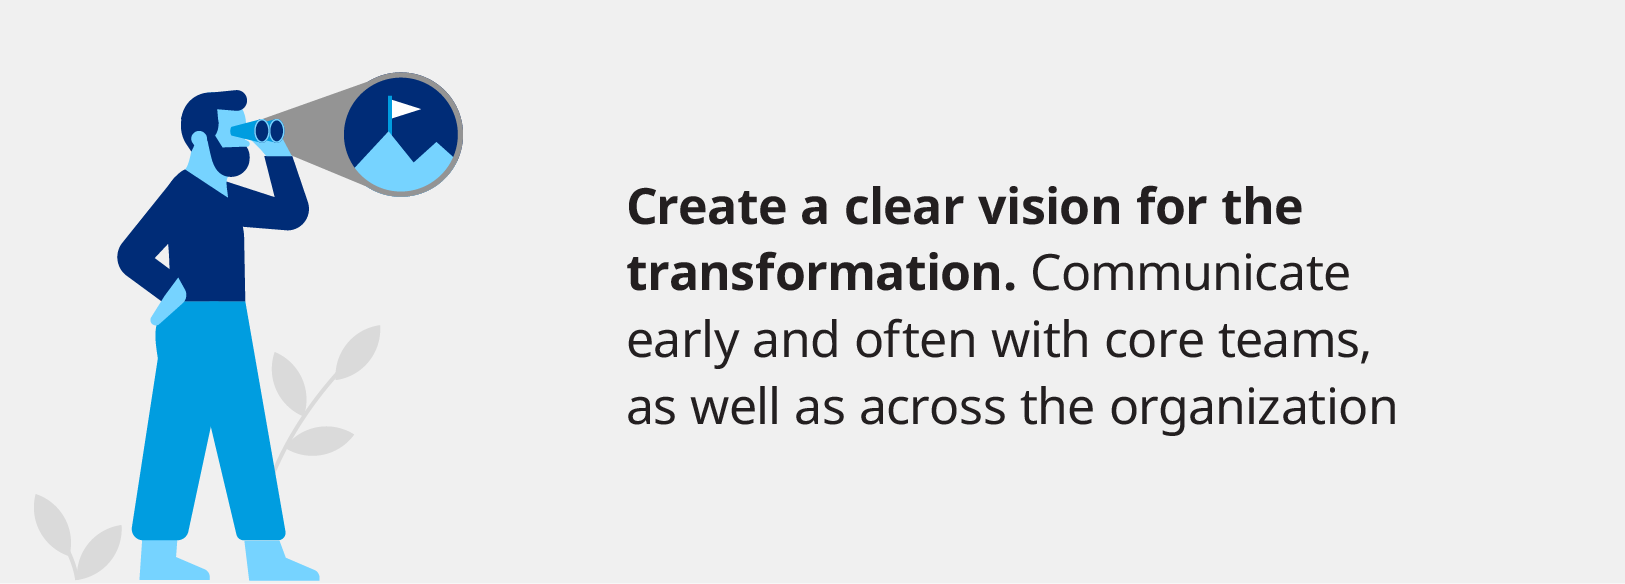 Create a clear vision for the transformation. Communicate early and often with core teams, as well as across the organization.